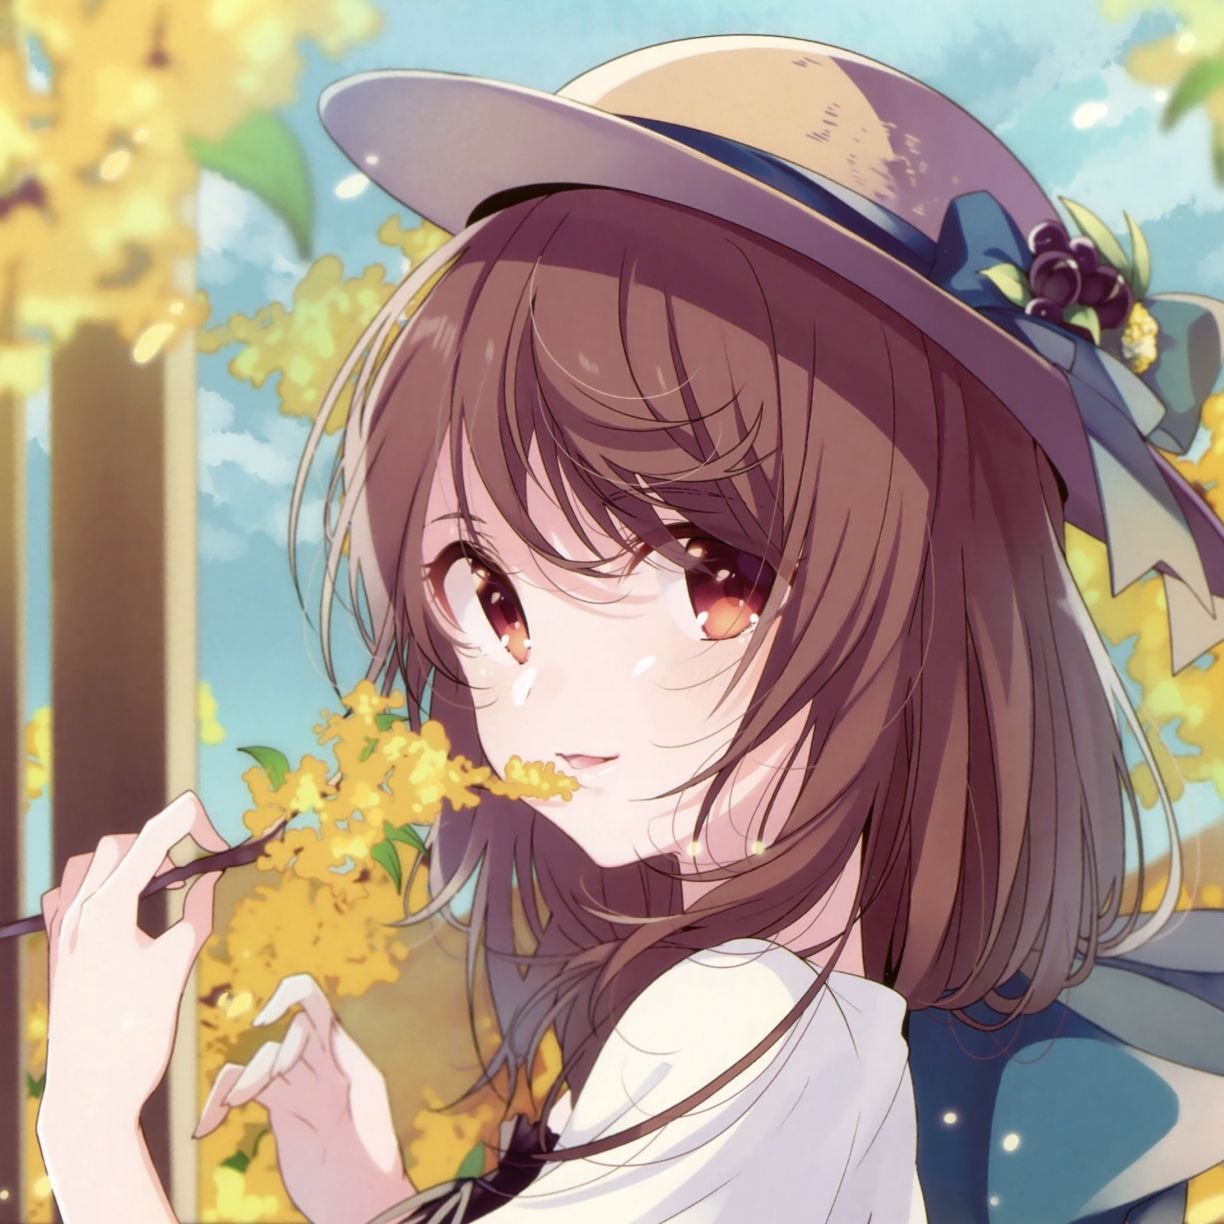 Anime girl with brown hair and a hat holding flowers - Anime girl